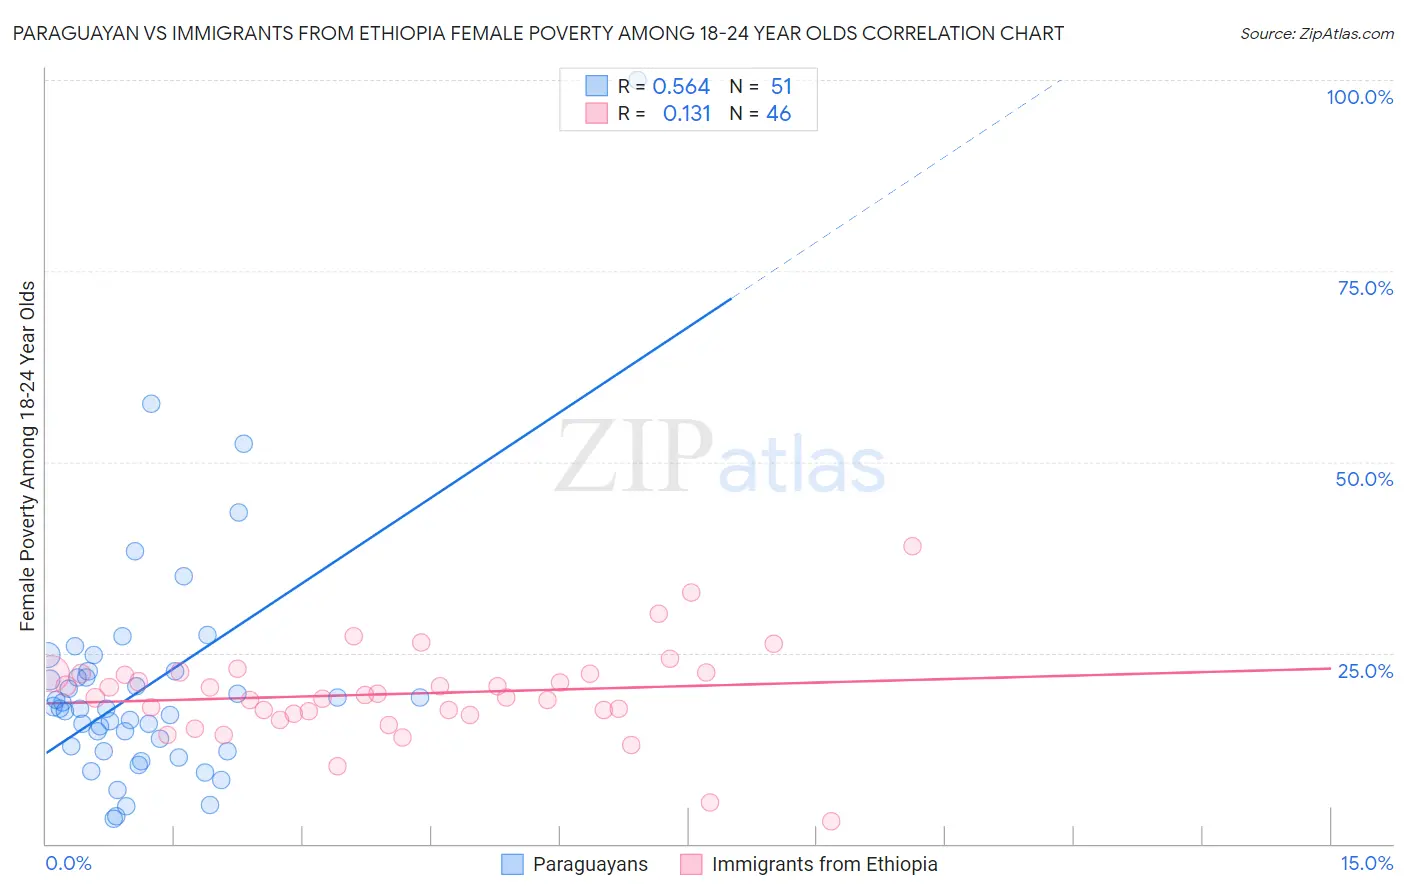 Paraguayan vs Immigrants from Ethiopia Female Poverty Among 18-24 Year Olds